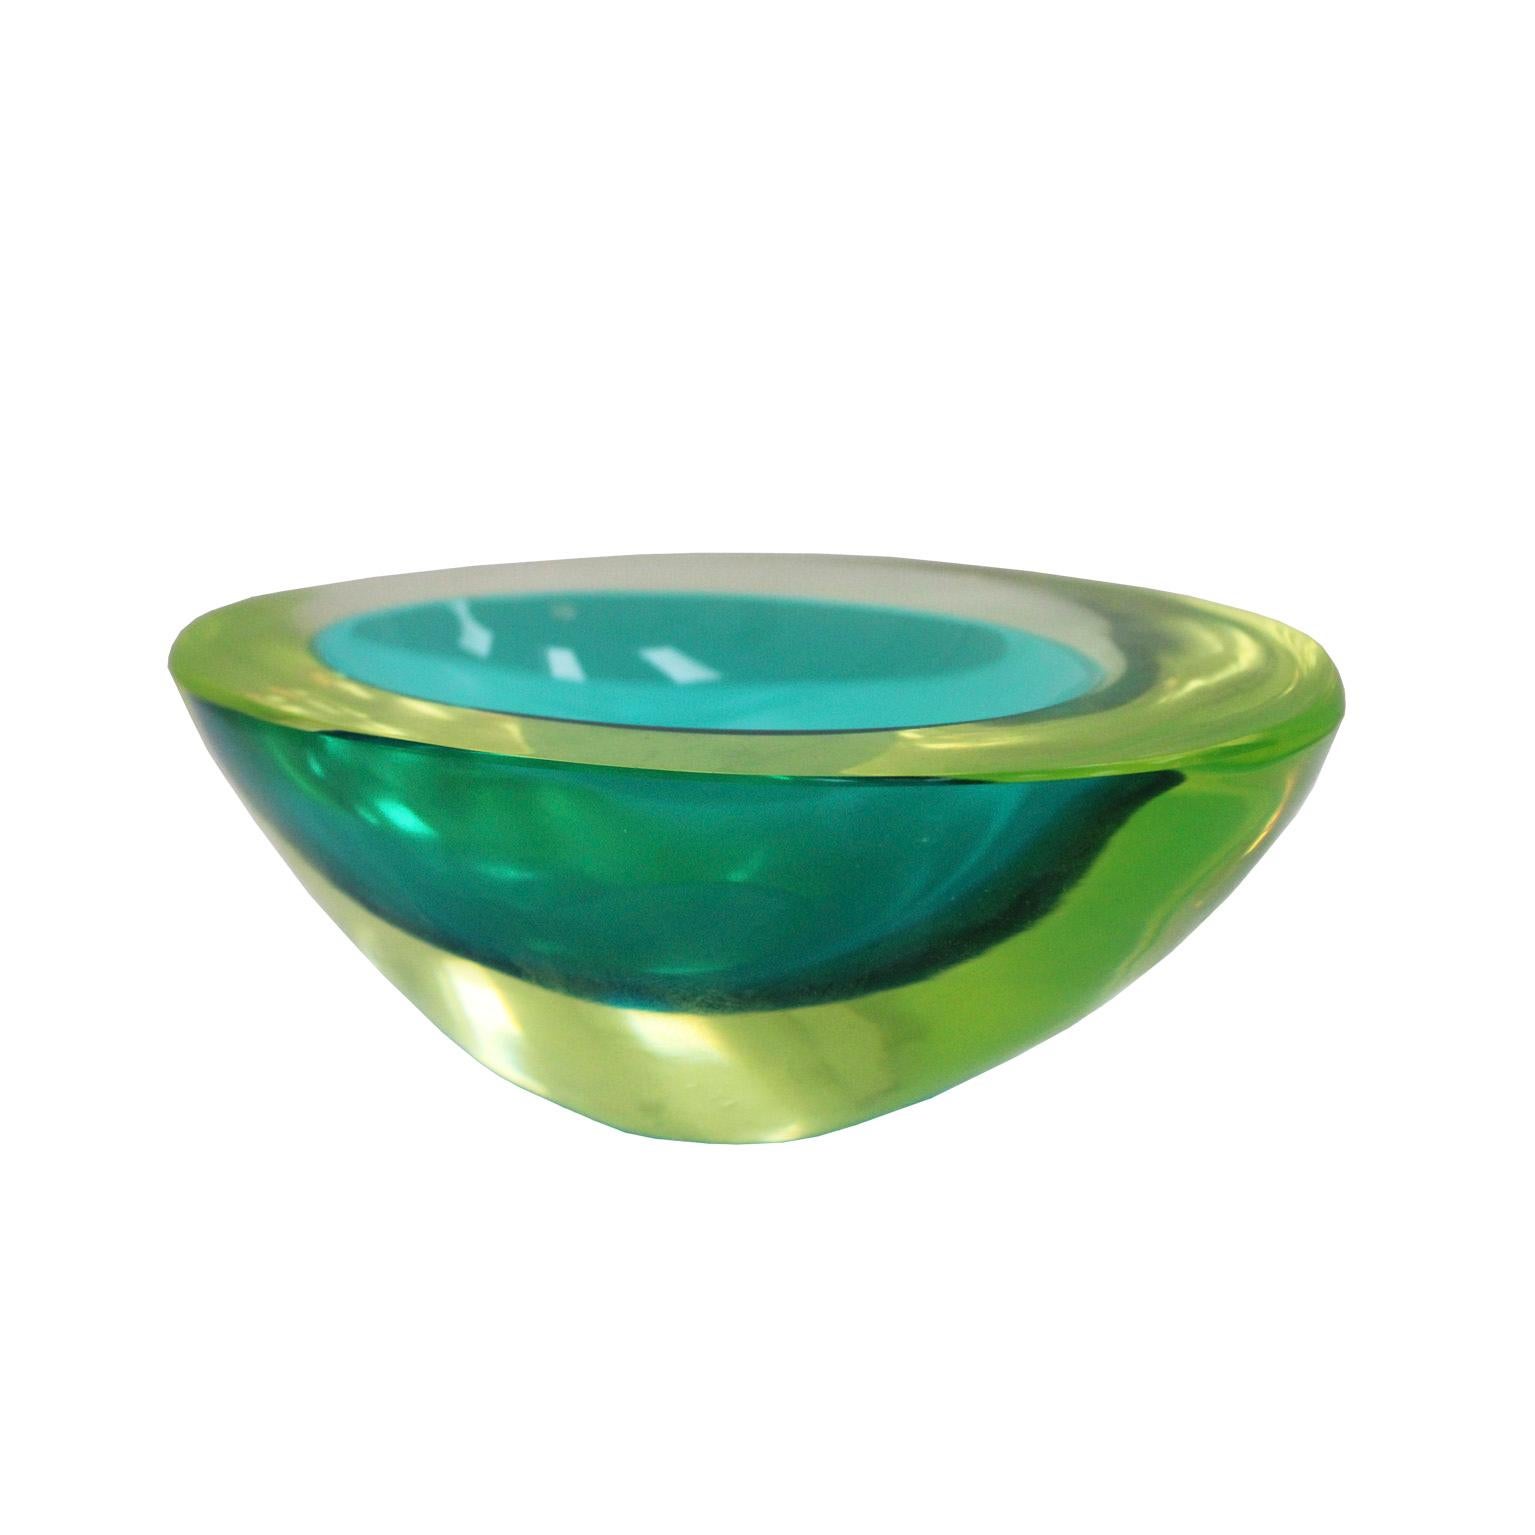 Mid-century Modern Glass vase. Attributed to Flavio Poli for Seguso. Italy, 50s.
In sommerso glass, the turquoise body is submerged in a very slightly yellow mass. (Color variant Giallo – Turchese)

Every item LA Studio offers is checked by our team